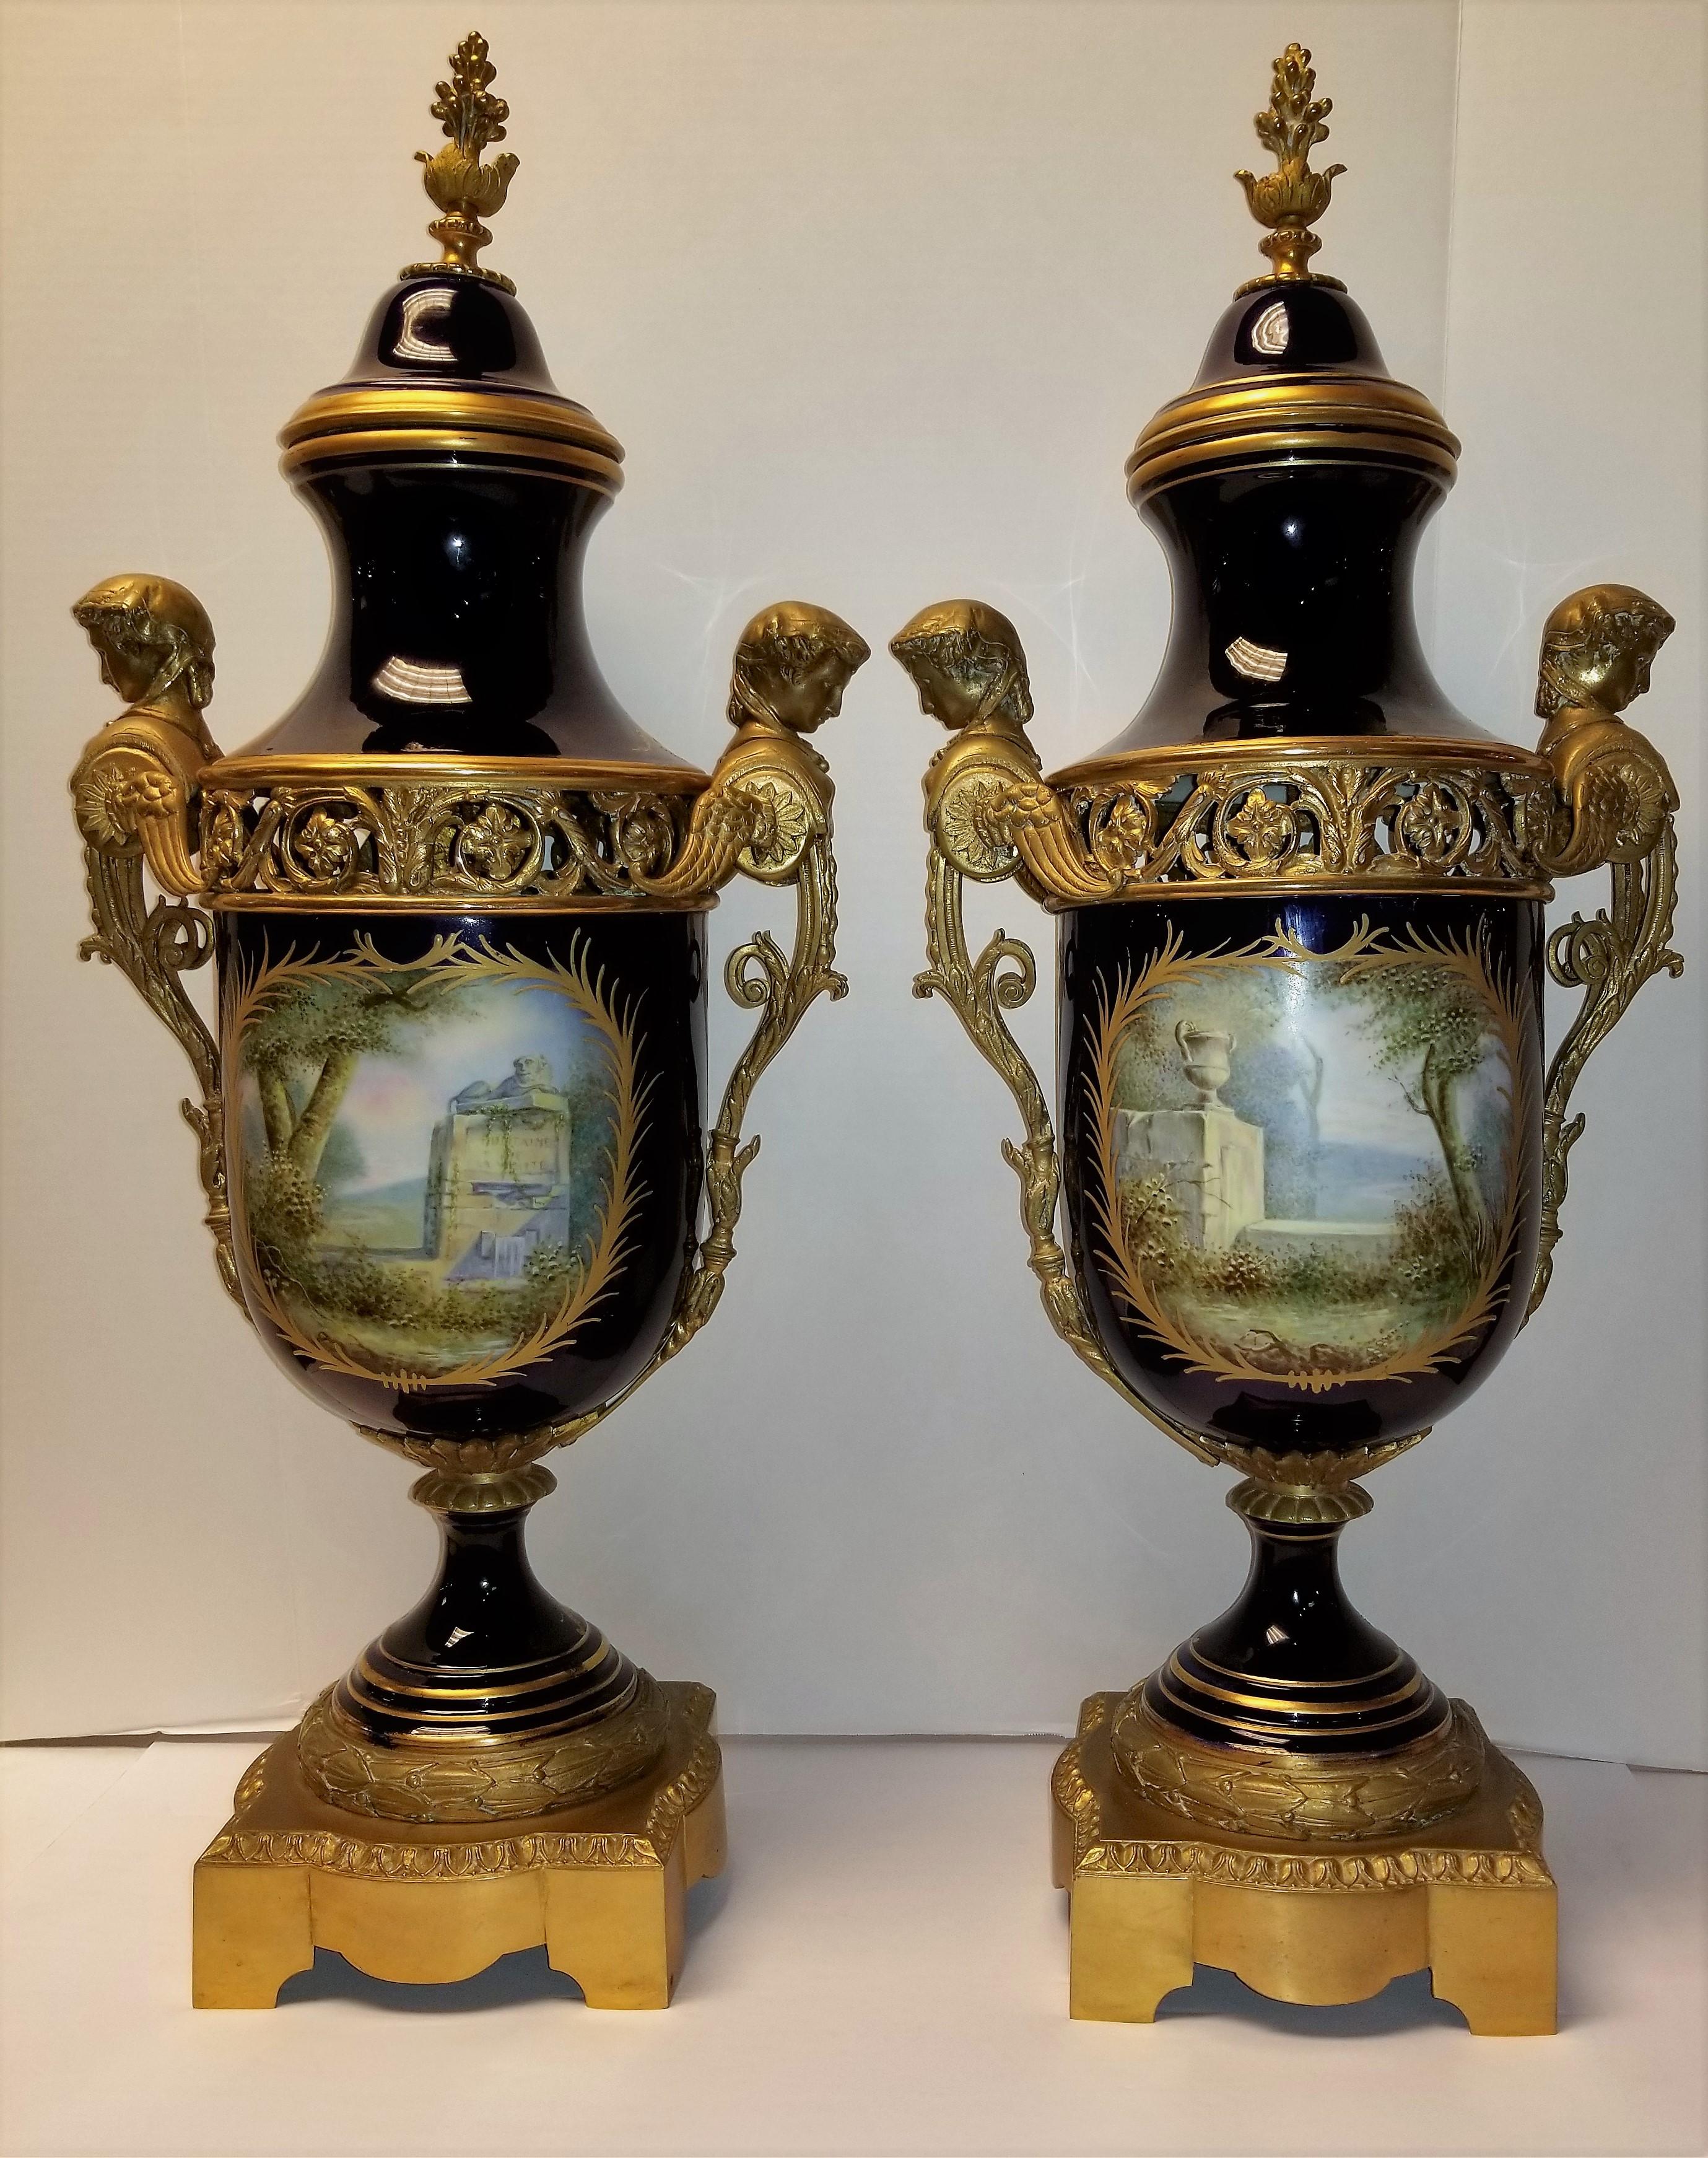 A magnificent and large pair of 19th century French Royal cobalt blue Sèvres Porcelain and bronze mounted covered vases. Each panel is beautifully hand painted with Watteau love scenes, and further adorned with 24-karat raised gold and enamel